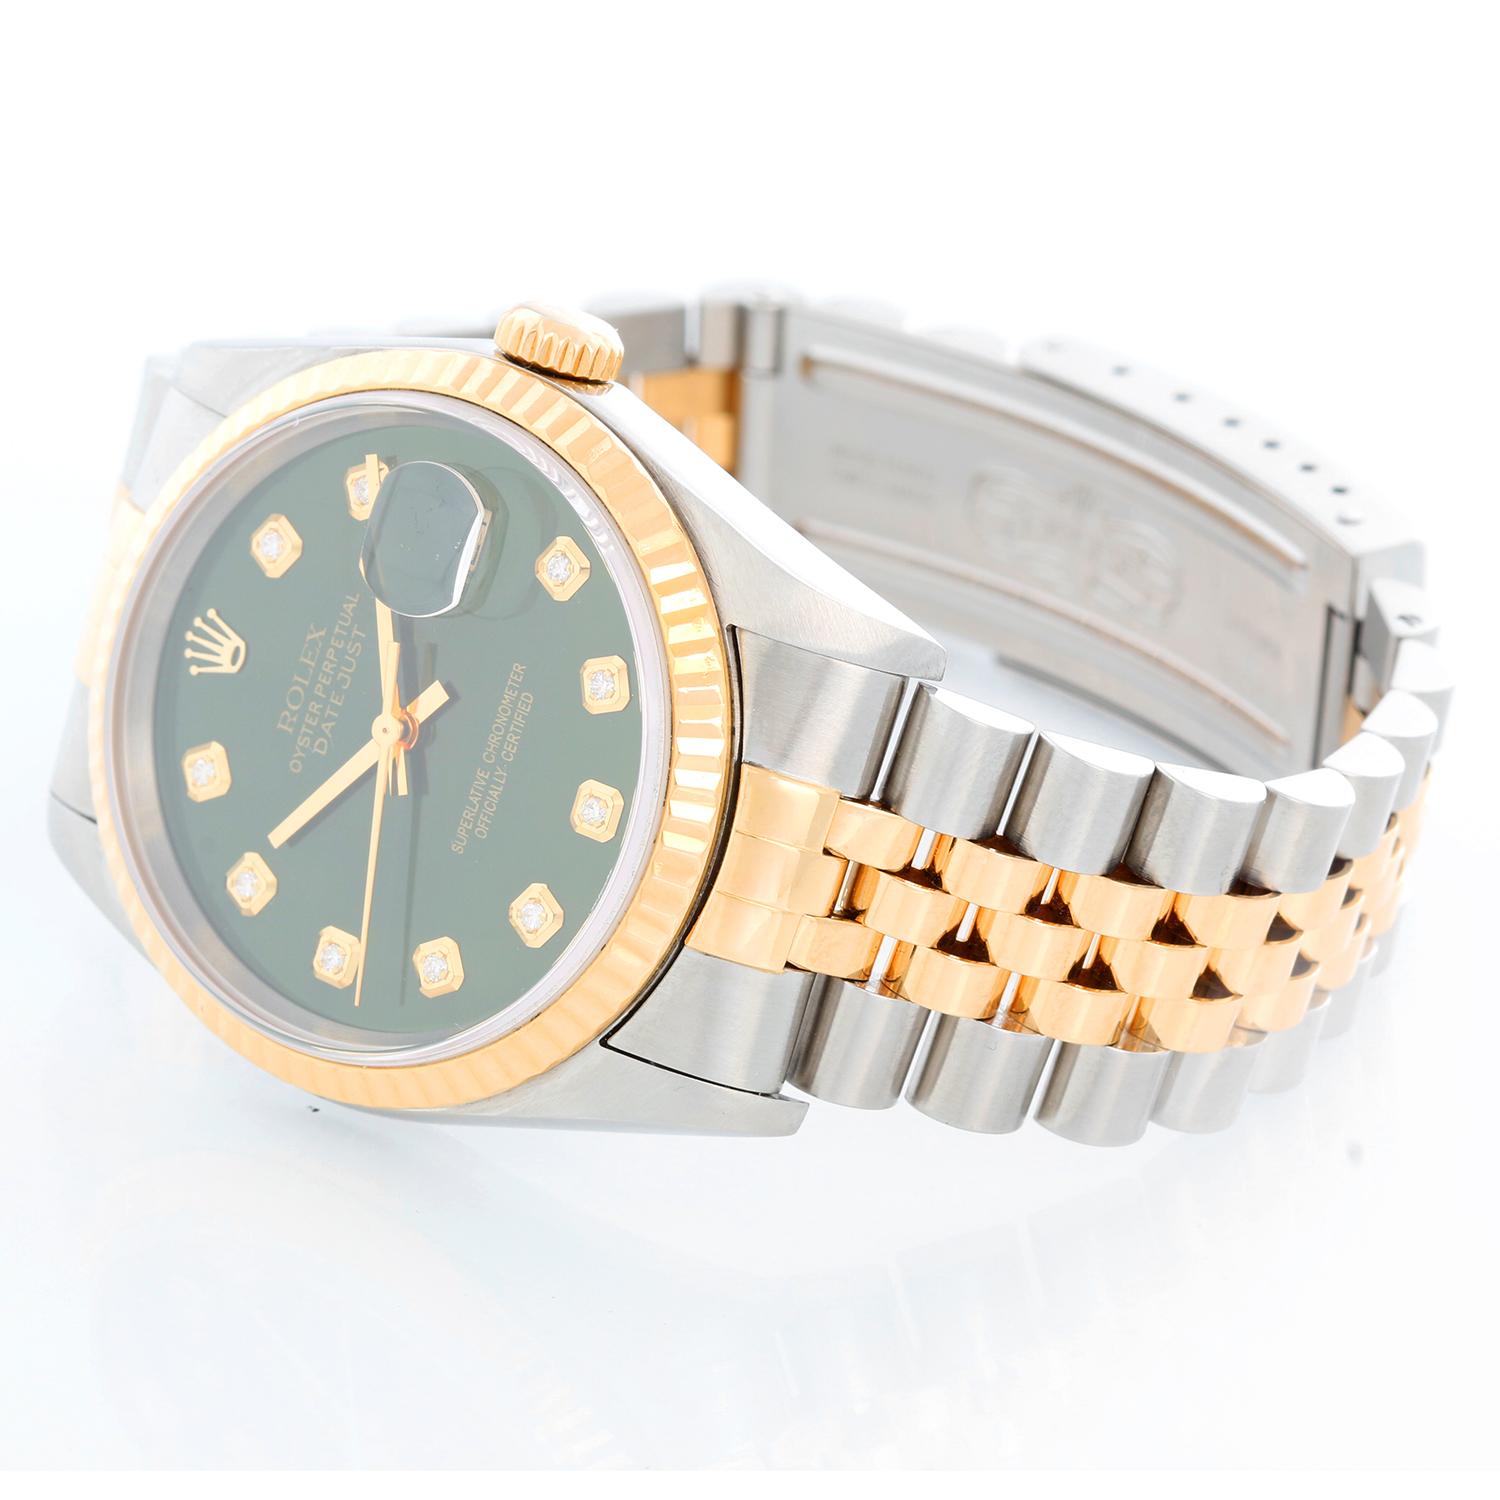 Rolex Datejust 2-Tone Men's Steel & Gold Watch 16233 - Automatic winding, Quickset, sapphire crystal. Stainless steel case with yellow gold bezel (36mm diameter). Green custom diamond dial . Stainless steel and 18k yellow gold Jubilee bracelet.